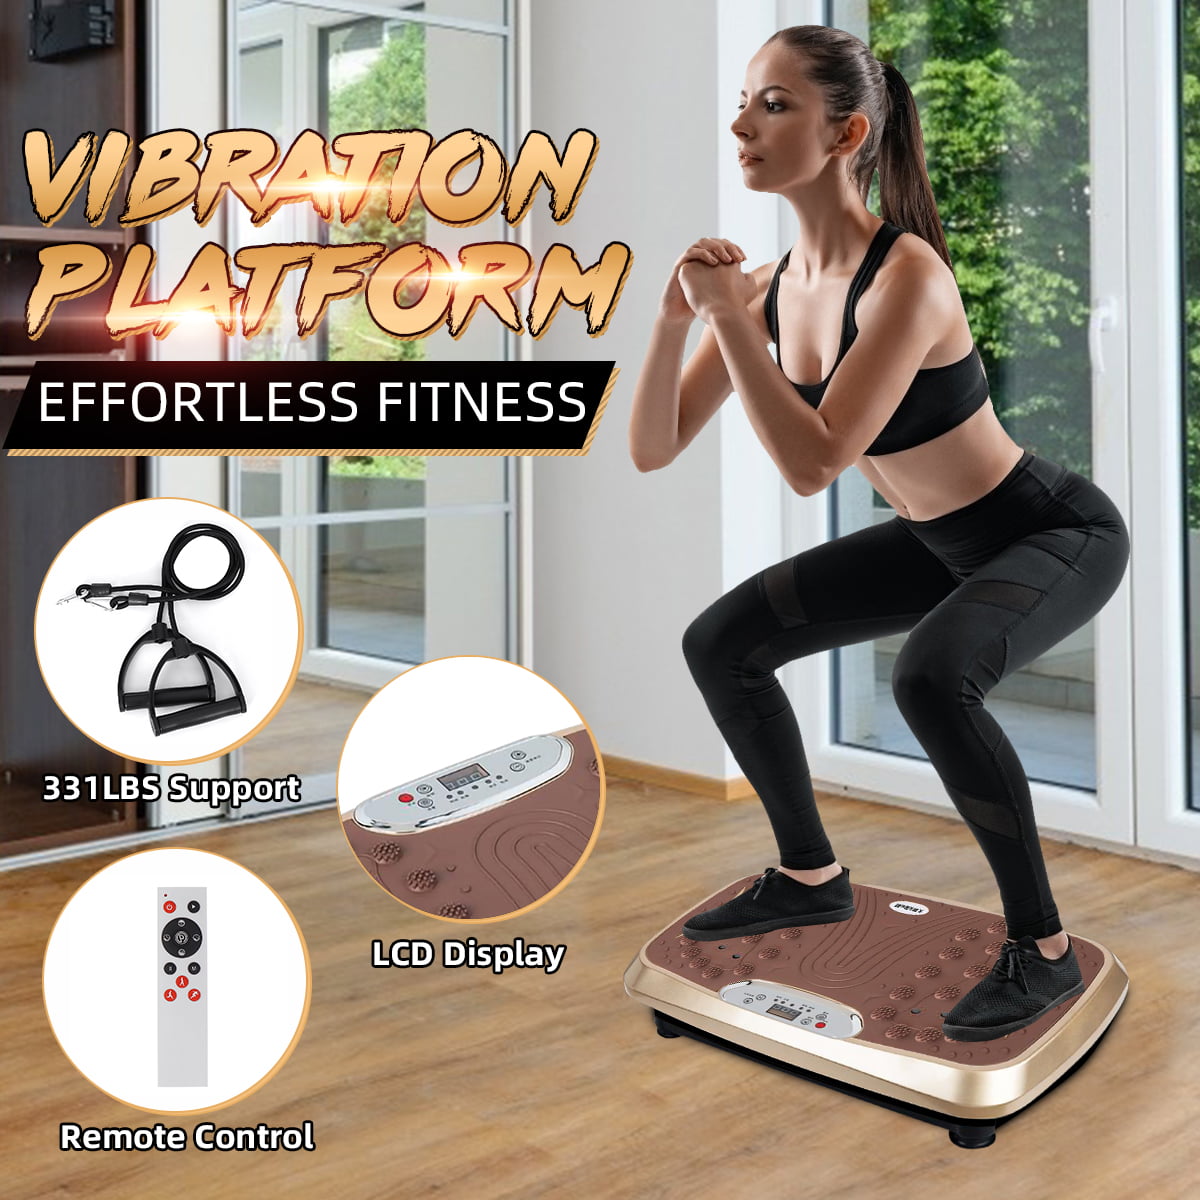 Whole Body Vibration Workout Platform Plate Fitness Machine with Bands Gift 2021 